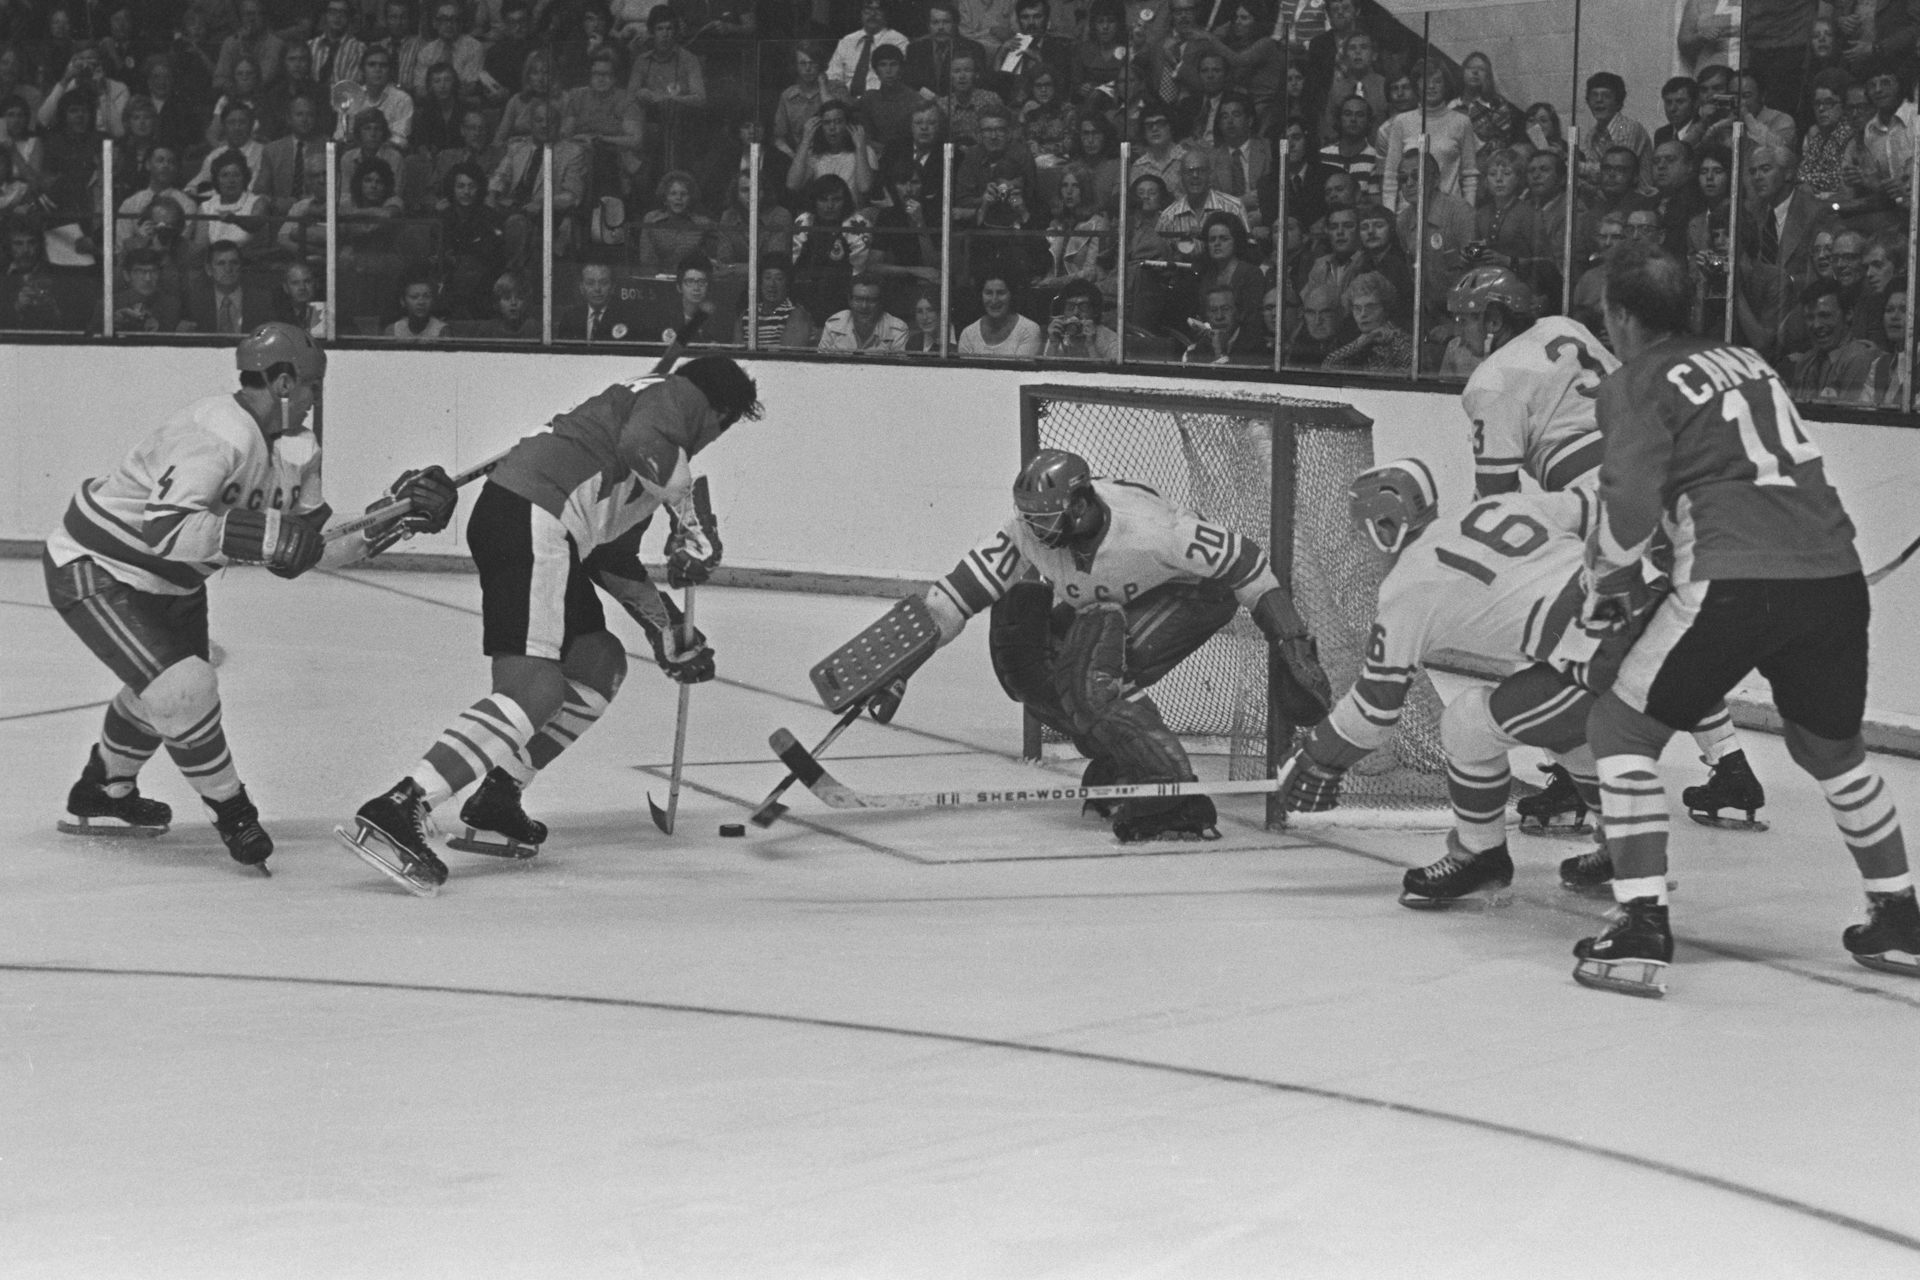 A black and white photo of Canadian hockey player about to score a goal on a U.S.S.R. goalie while his teammate tries to stop it with his hockey stick